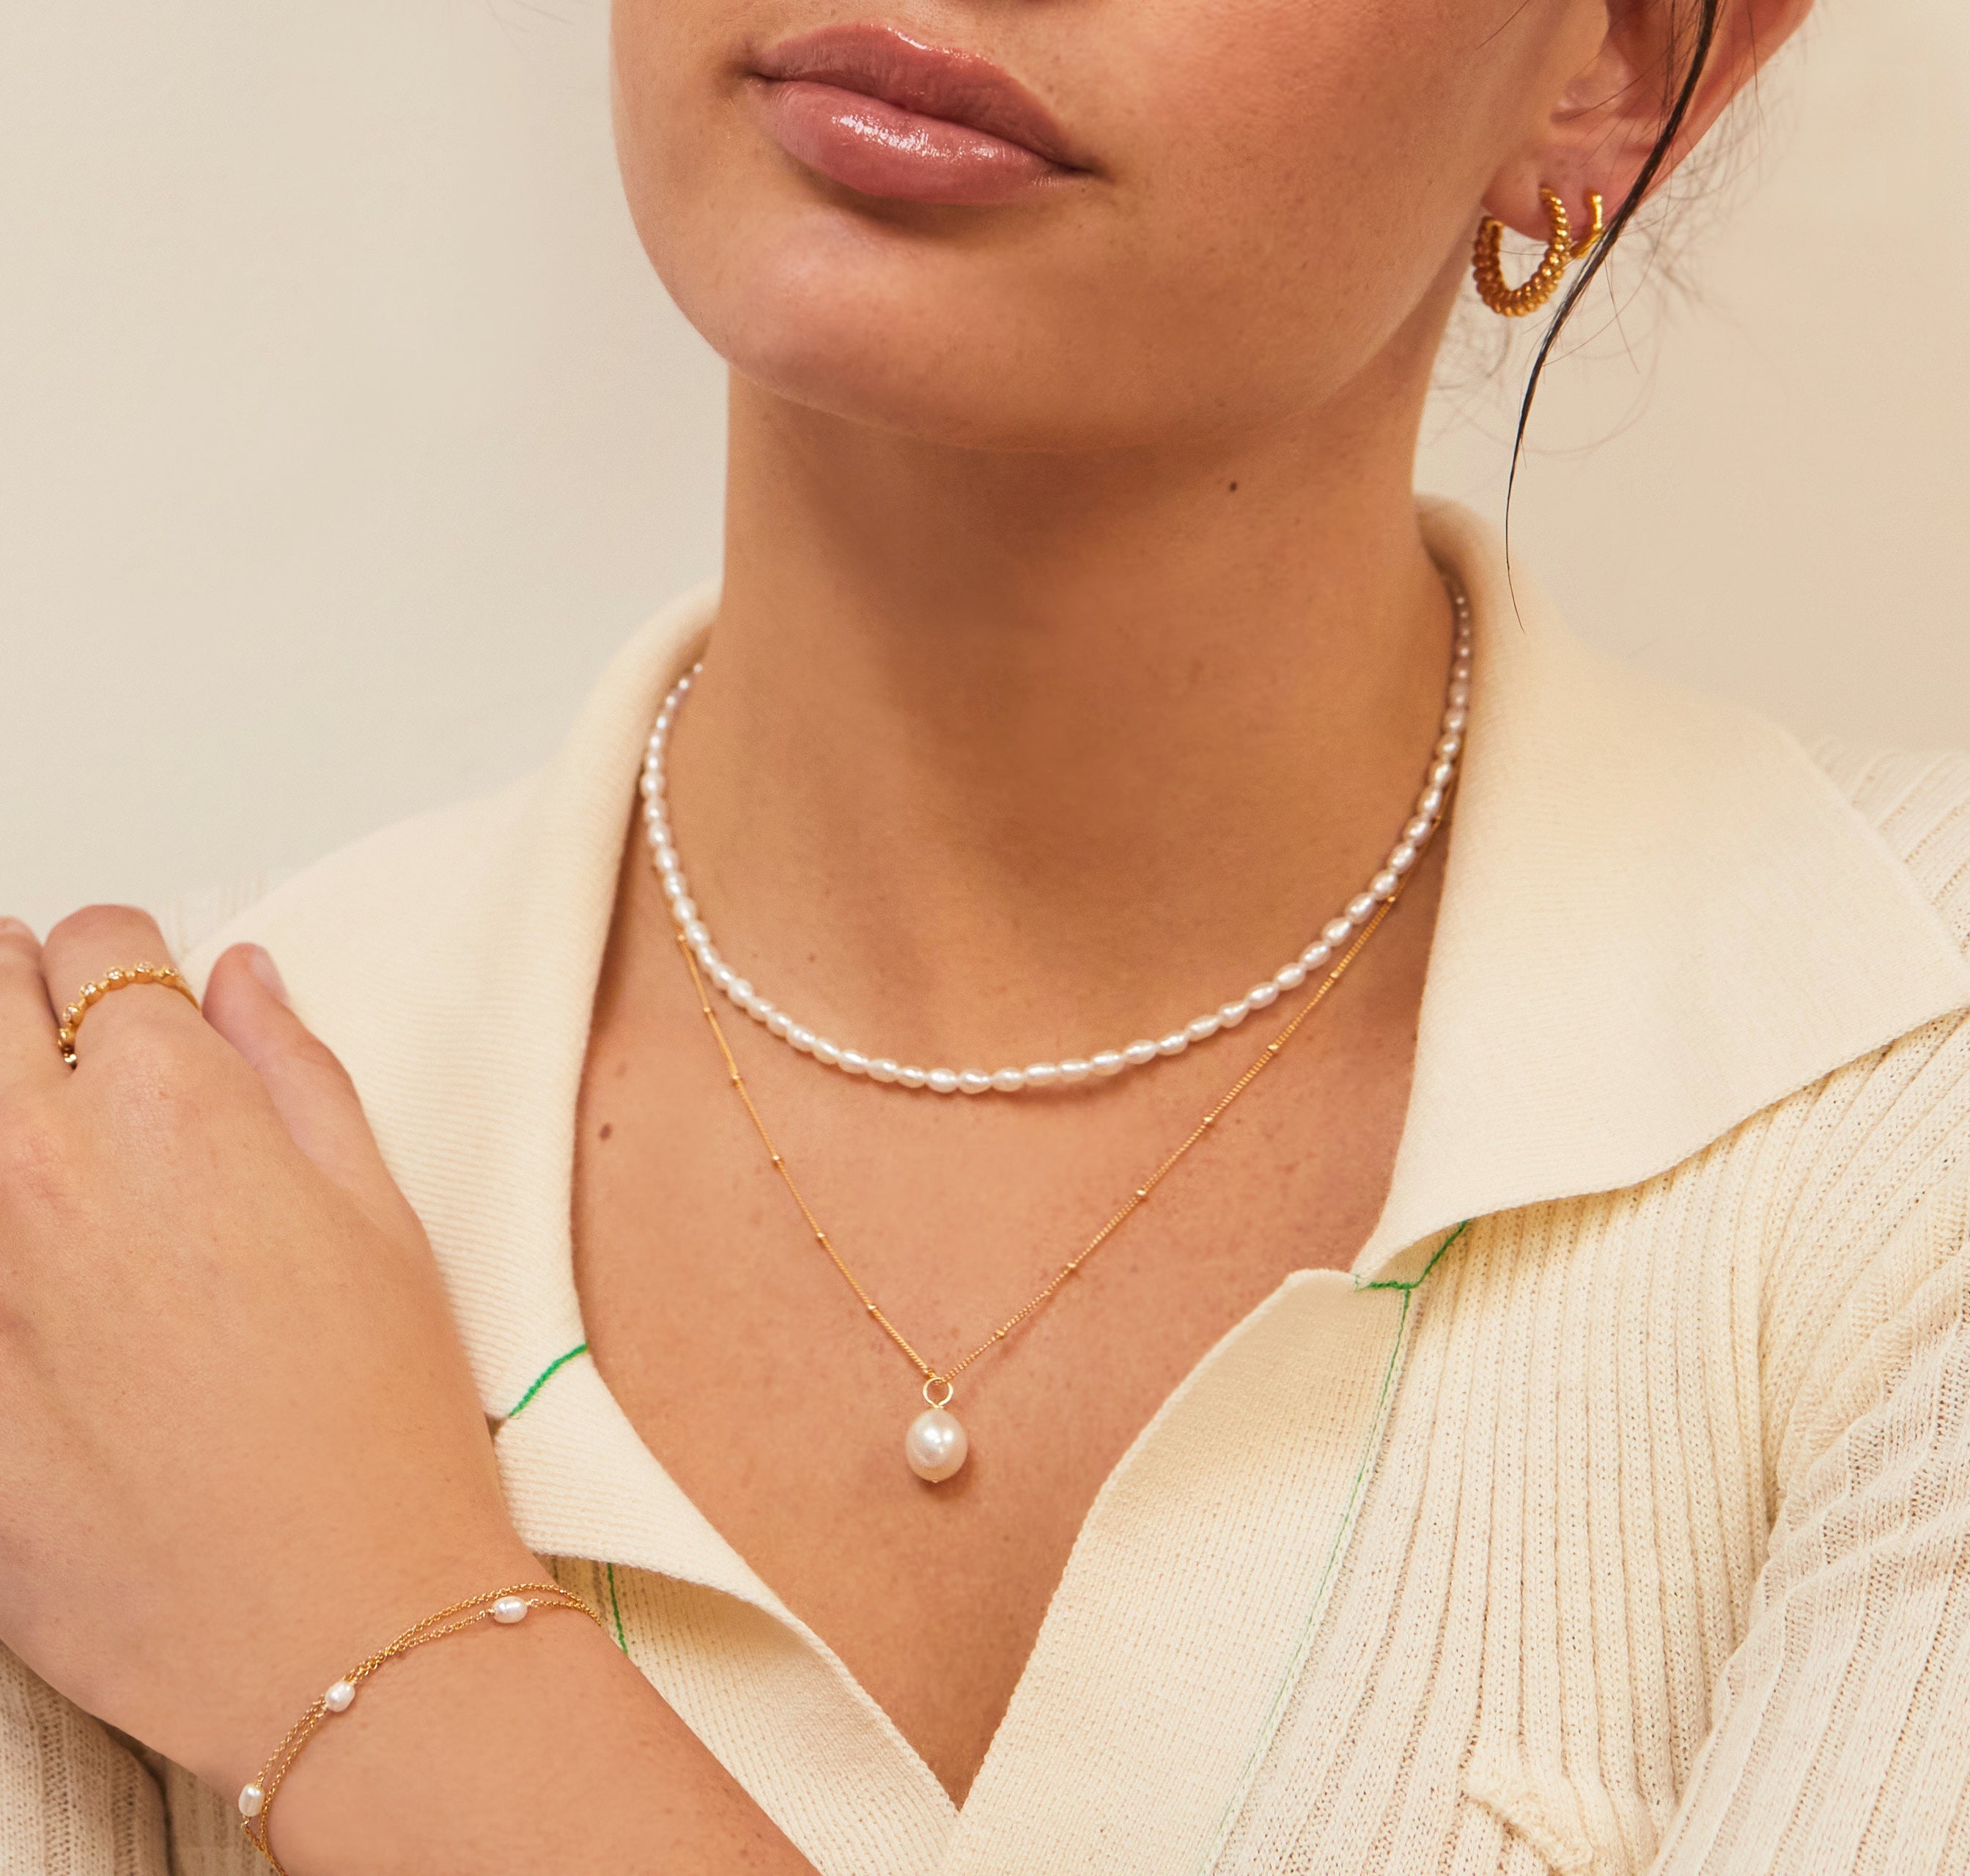 Gold large pearl satellite necklace and pearl chocker on a woman with a cream collared shirt